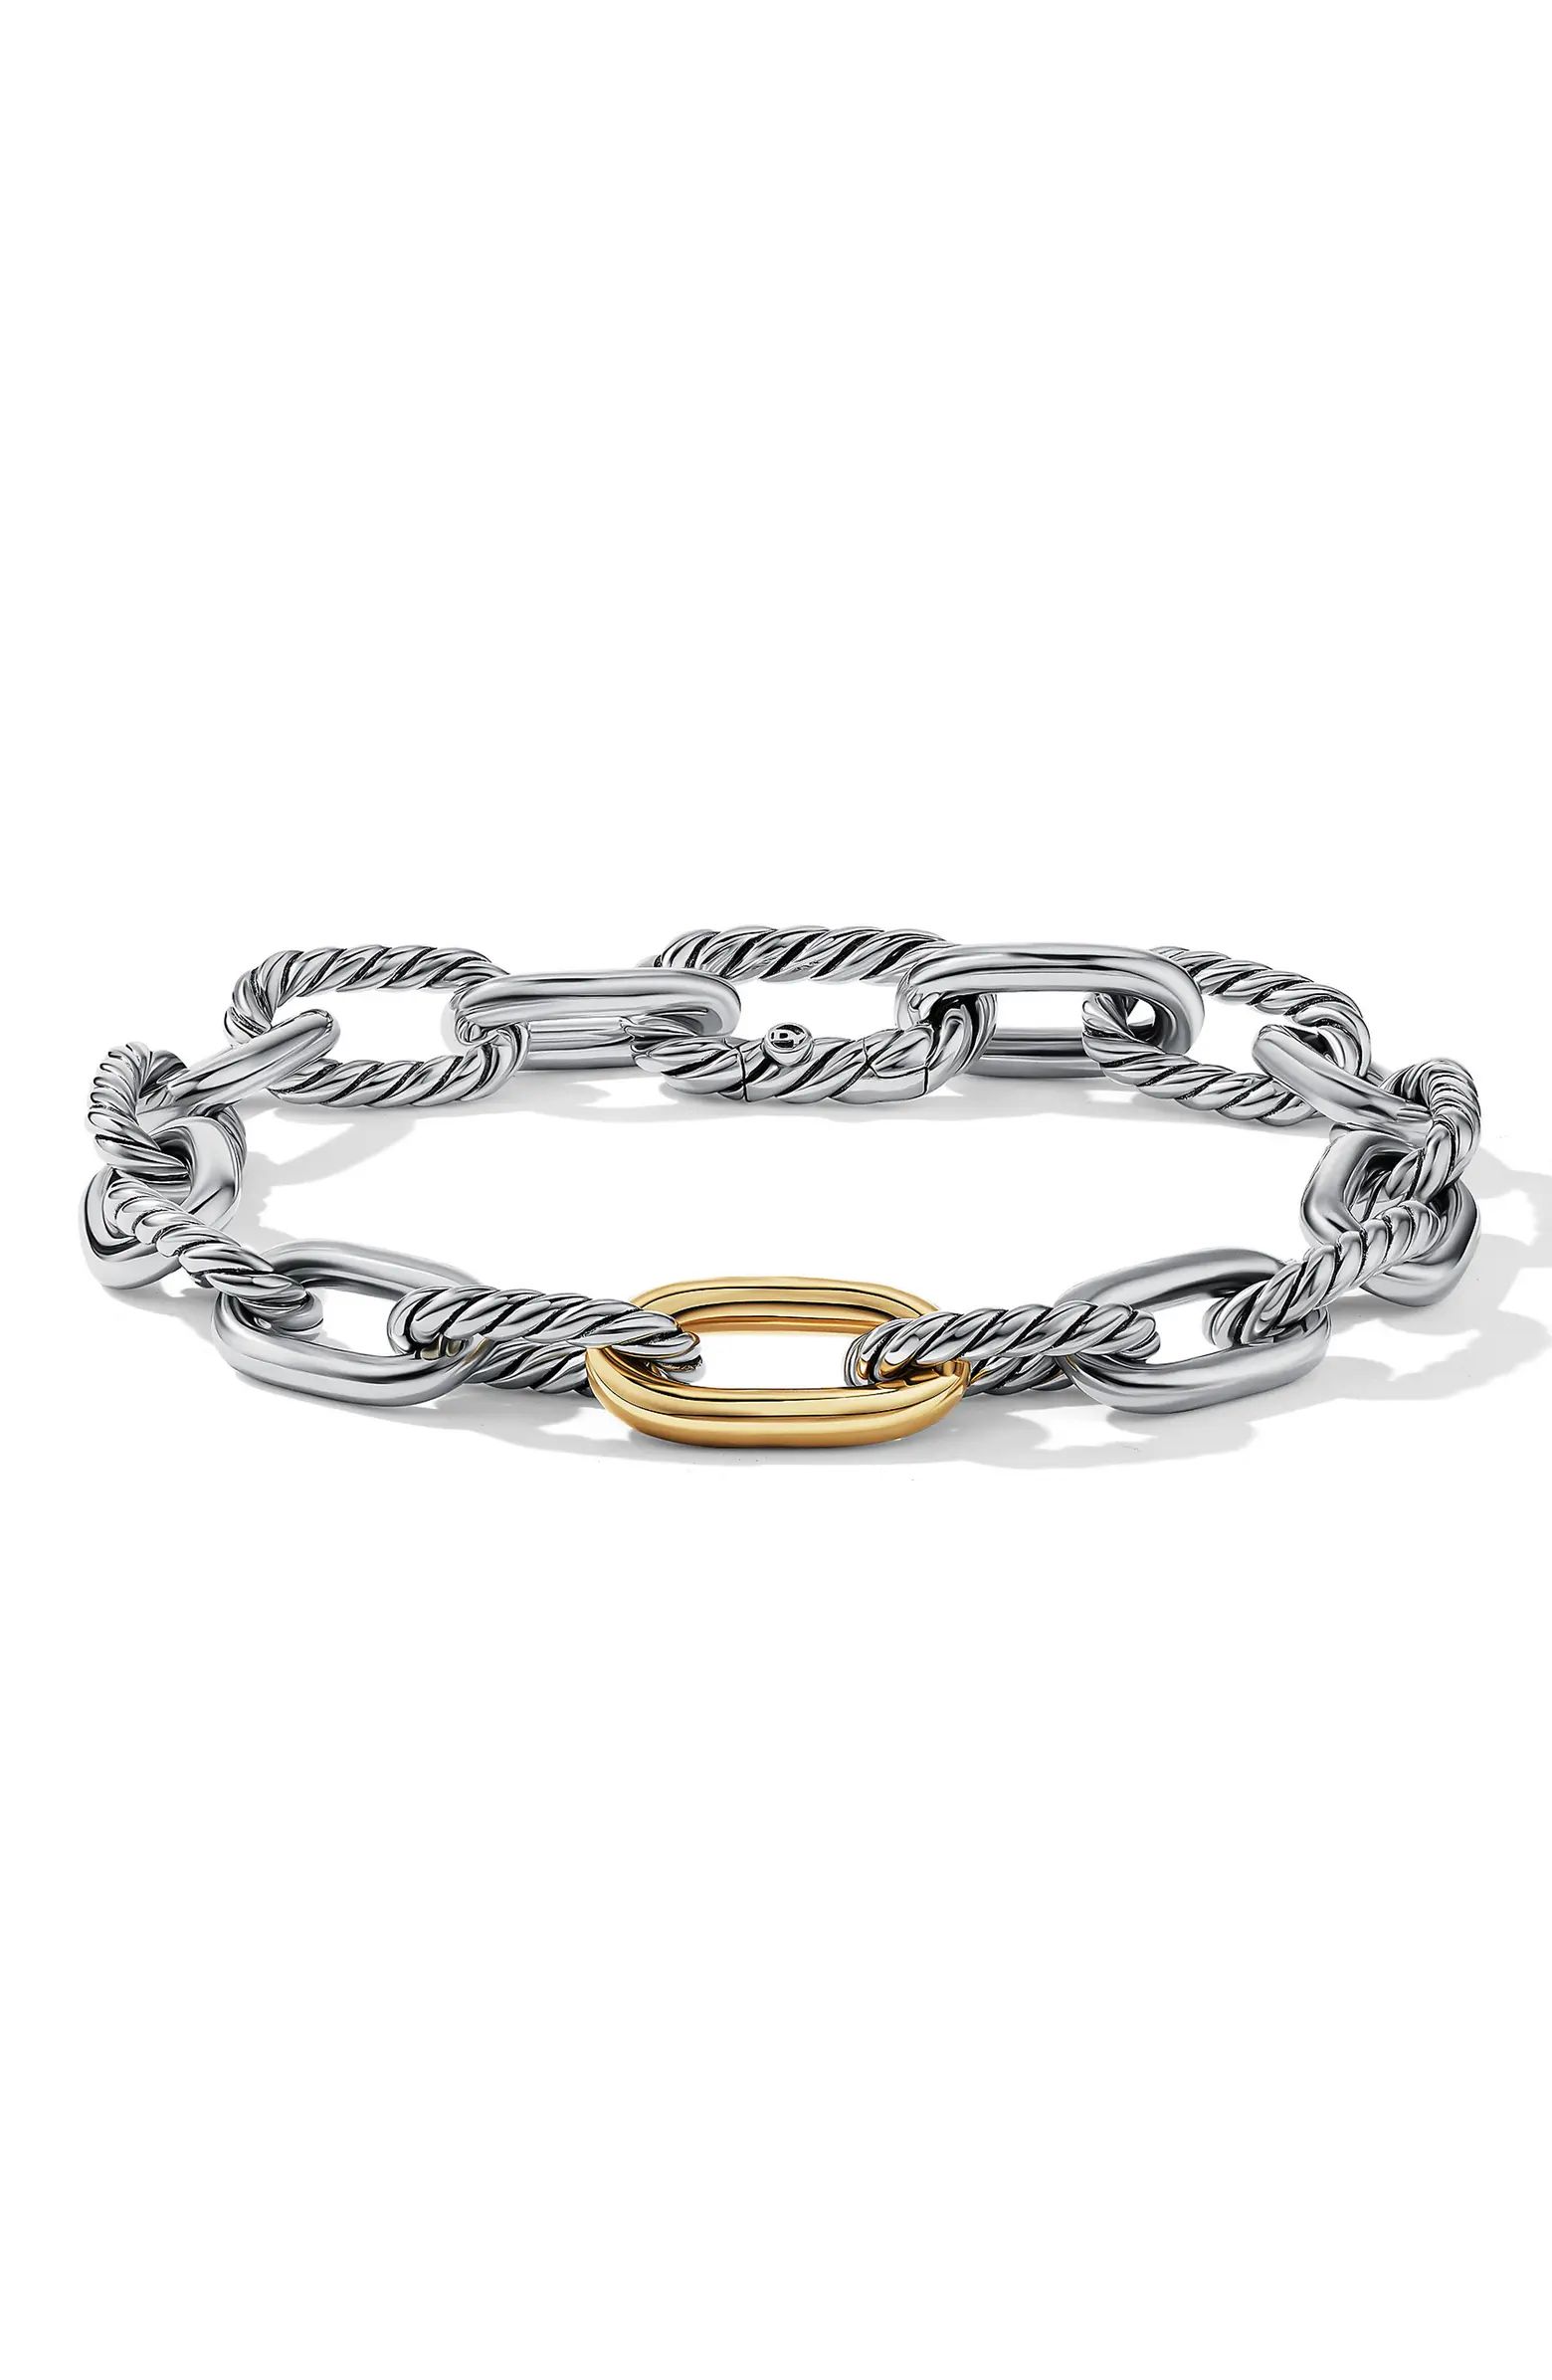 DY Madison Chain in Sterling Silver with 18K Gold Bracelet, 8.5mm | Nordstrom